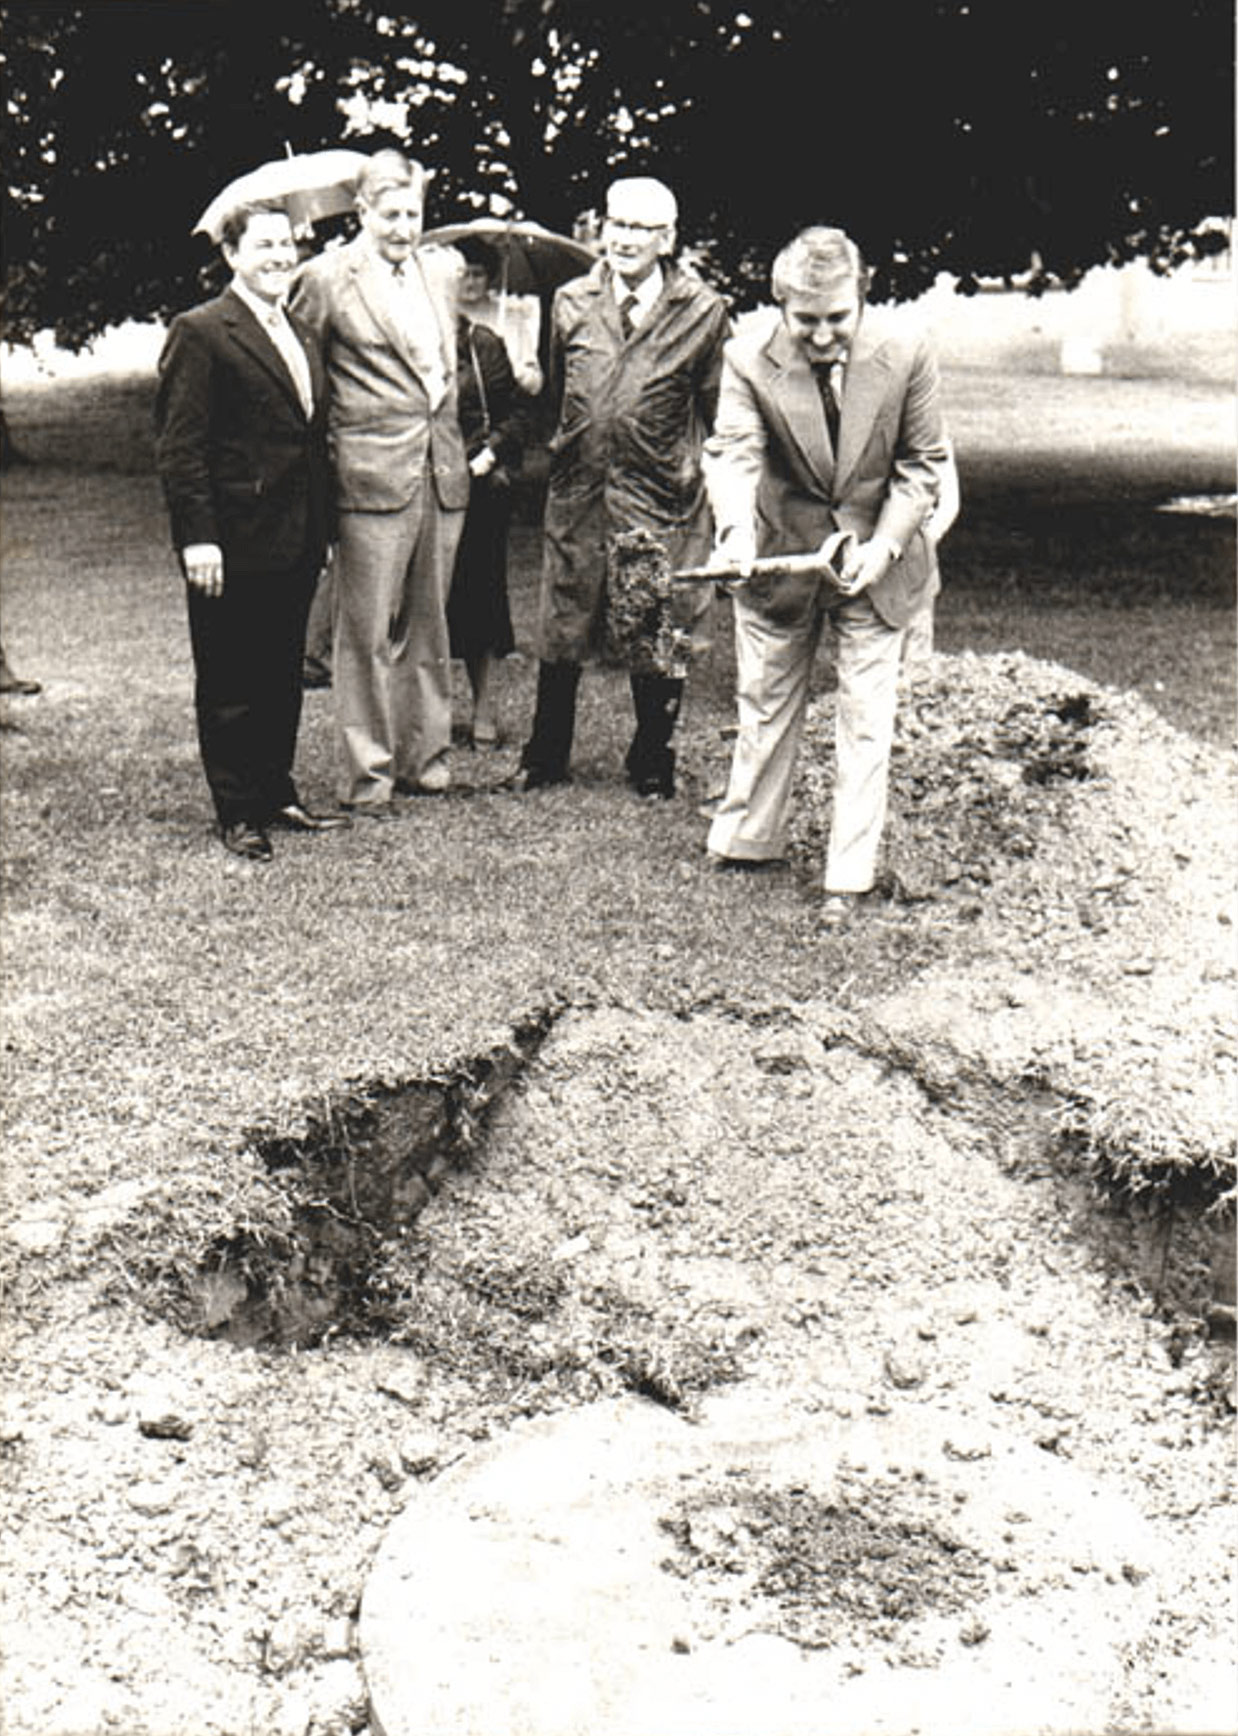 Black and white photo of four men helping to cover a time capsule in a park